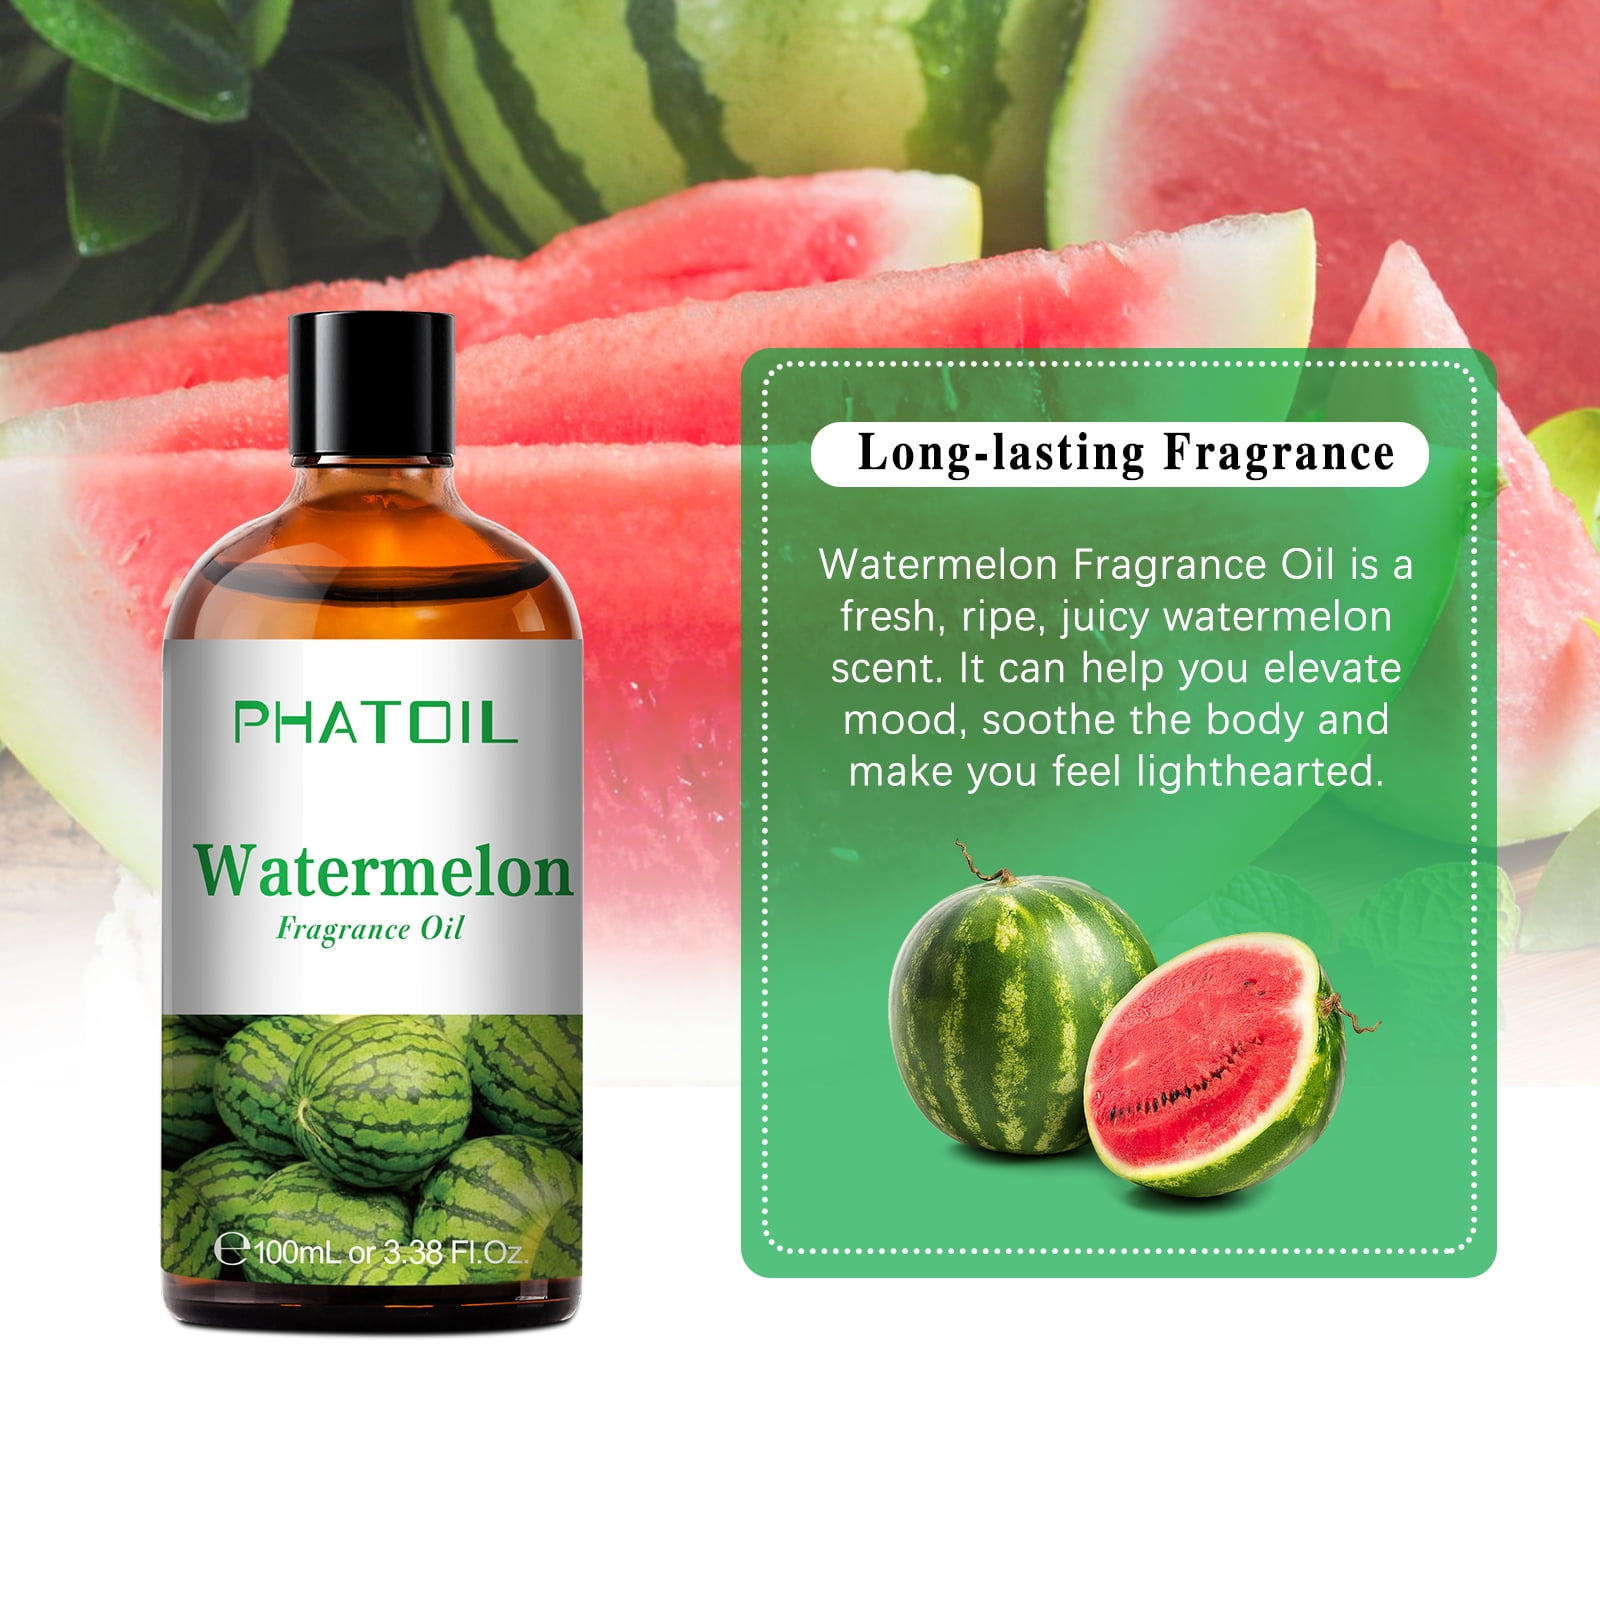 AKARZ natural Watermelon essential oil aromatic for aromatherapy diffusers  body skin care aroma Watermelon oil